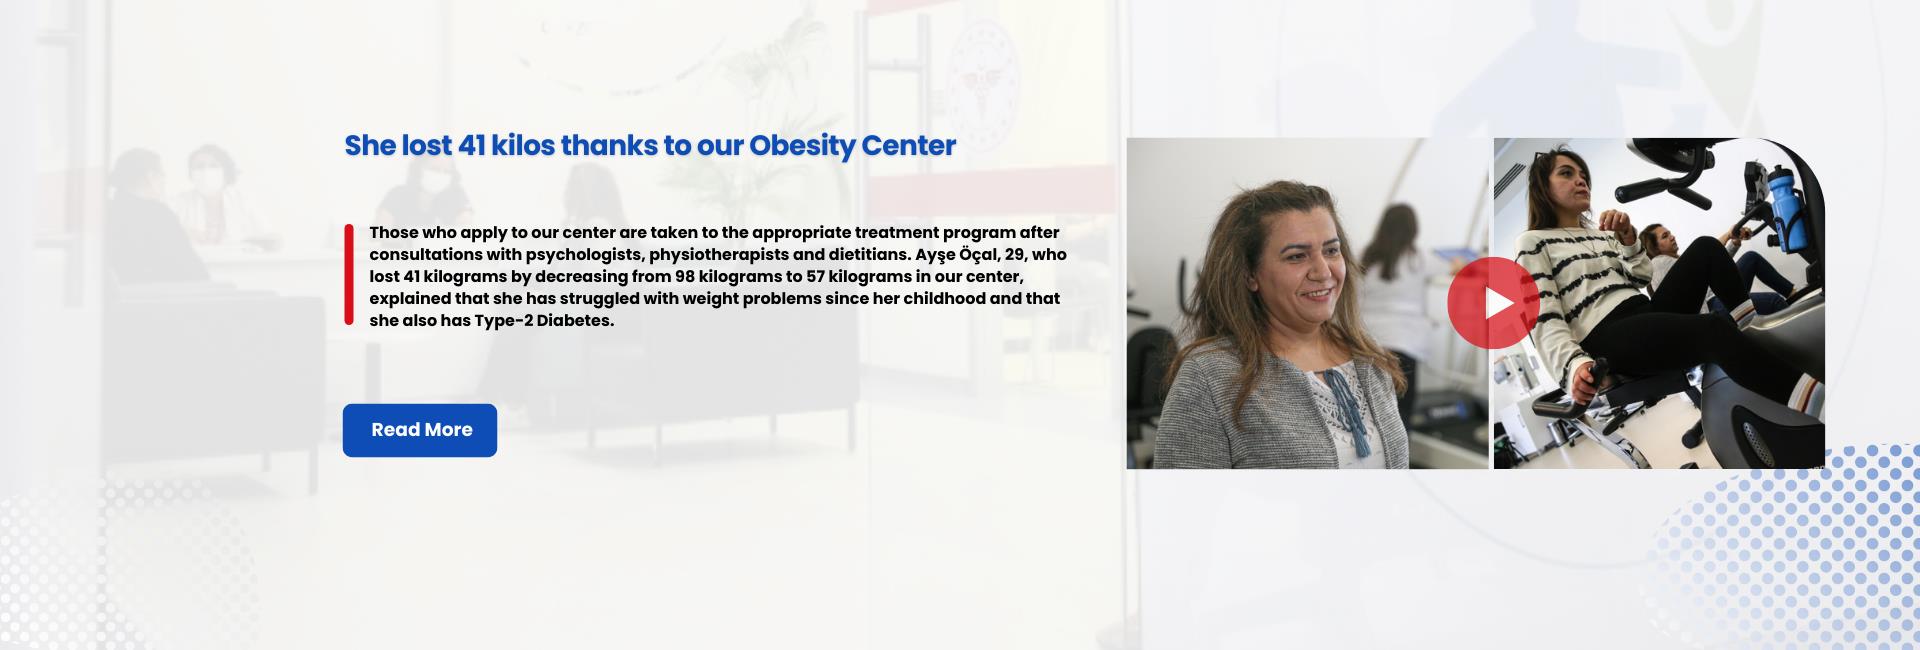 She lost 41 kilos thanks to our Obesity Center